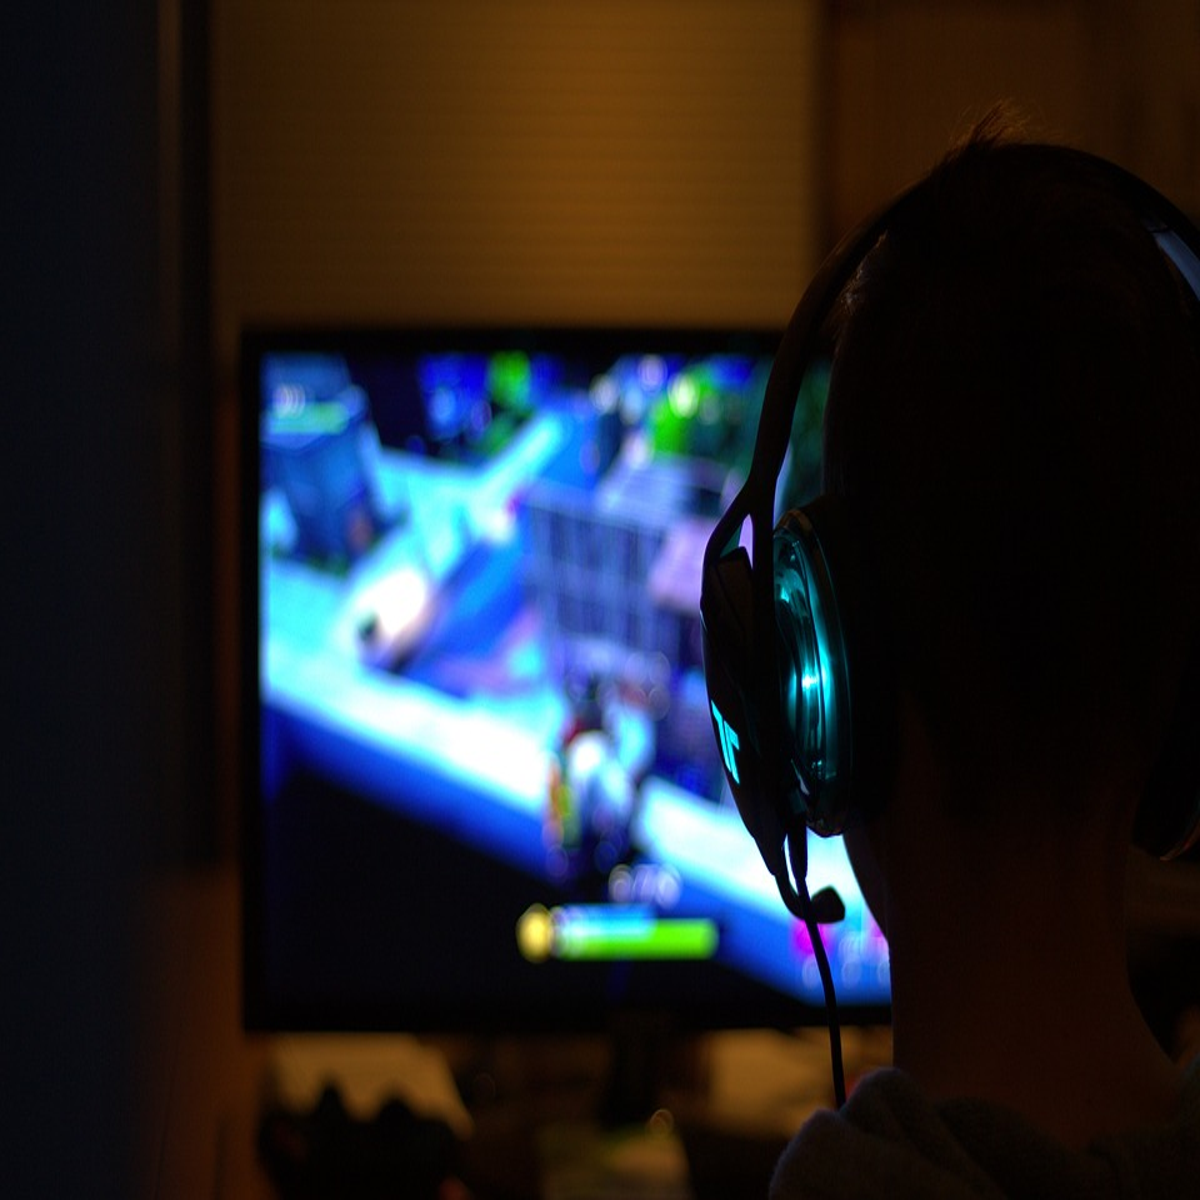 The online gaming industry and child rights